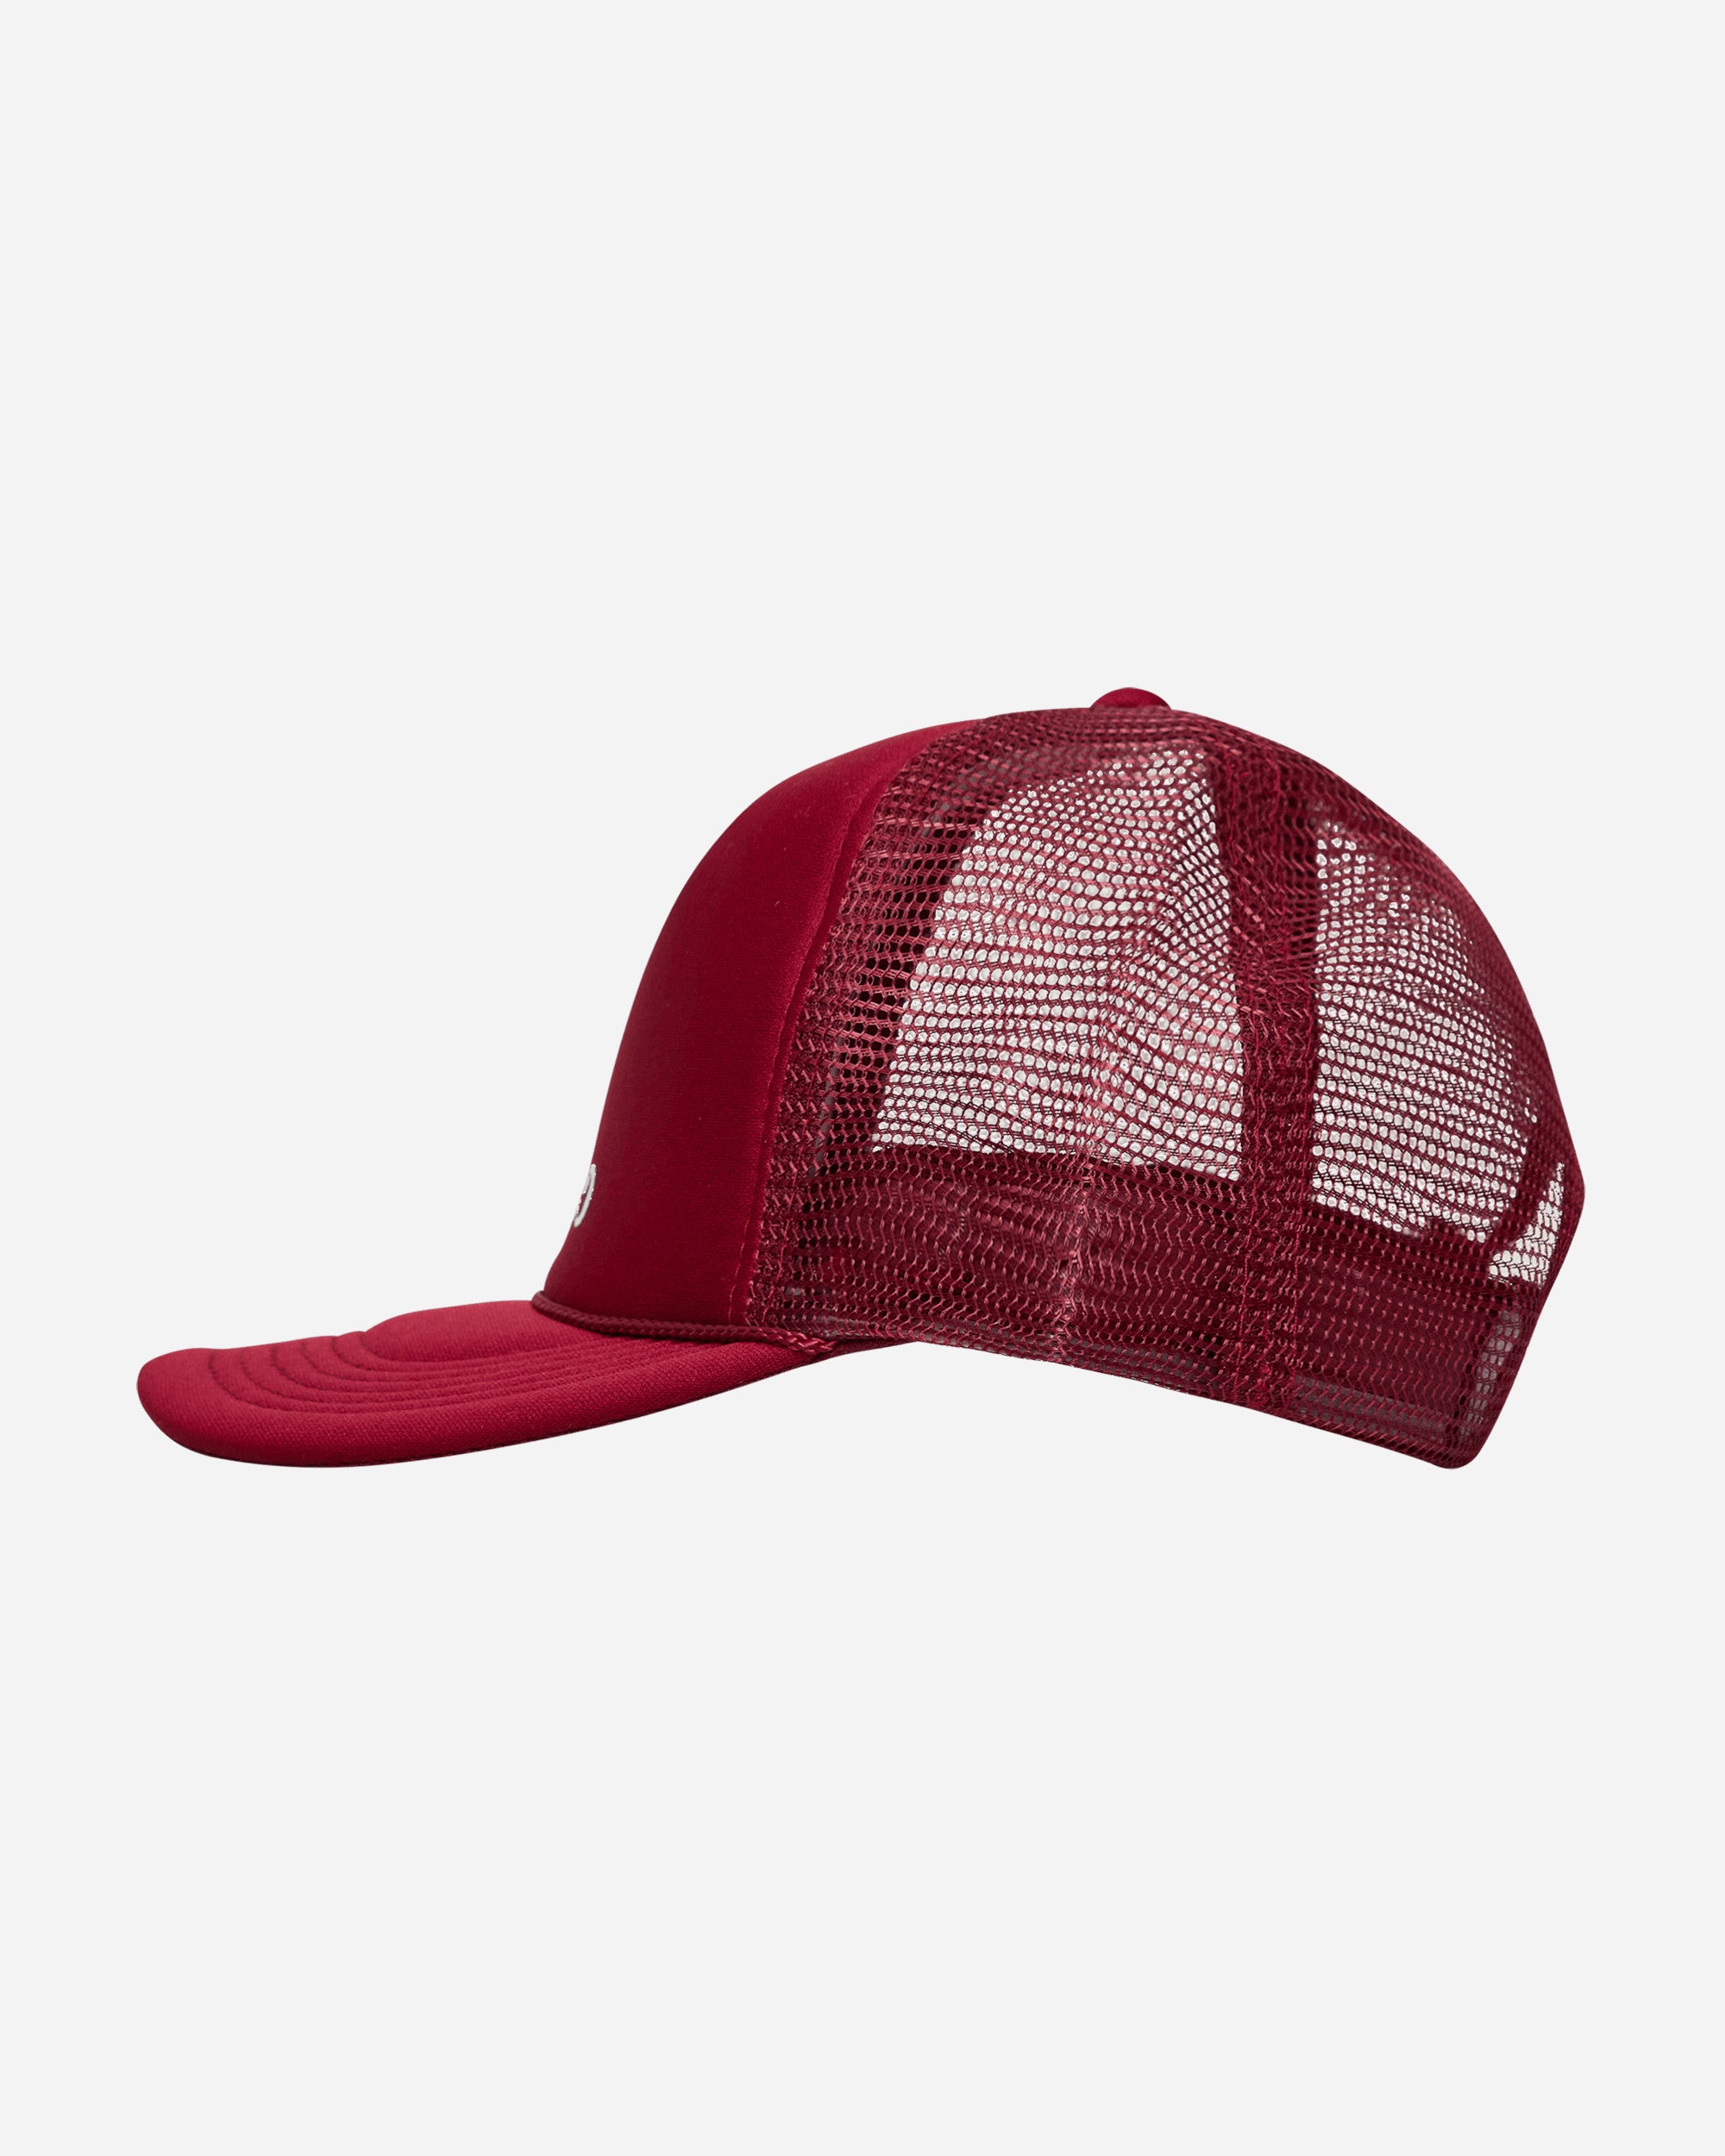 Shop Camp High Egg Guy Cap In Red